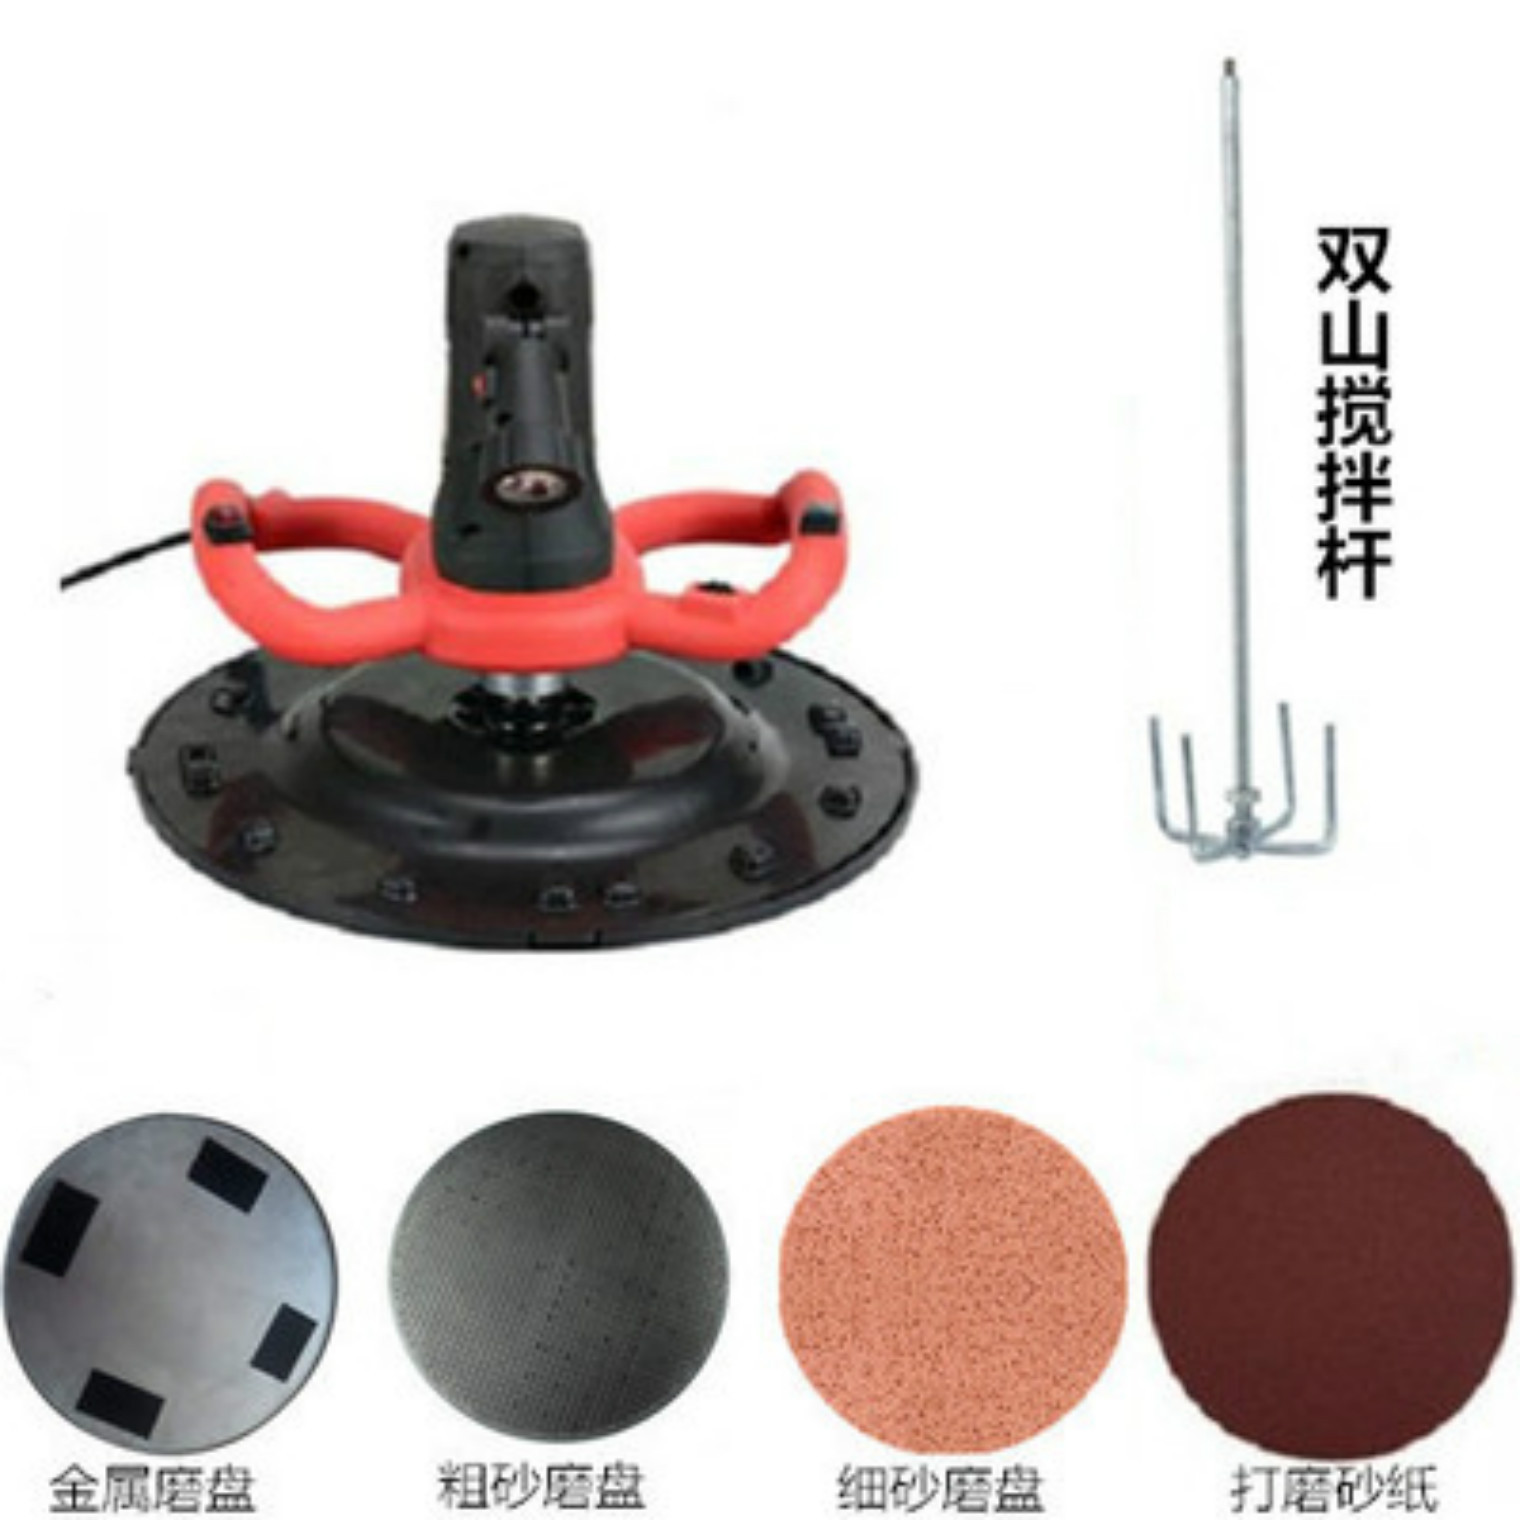 cement mortar Ray machine Handheld Electric metope Terrace wear-resisting Iron plate Coarse grinding putty